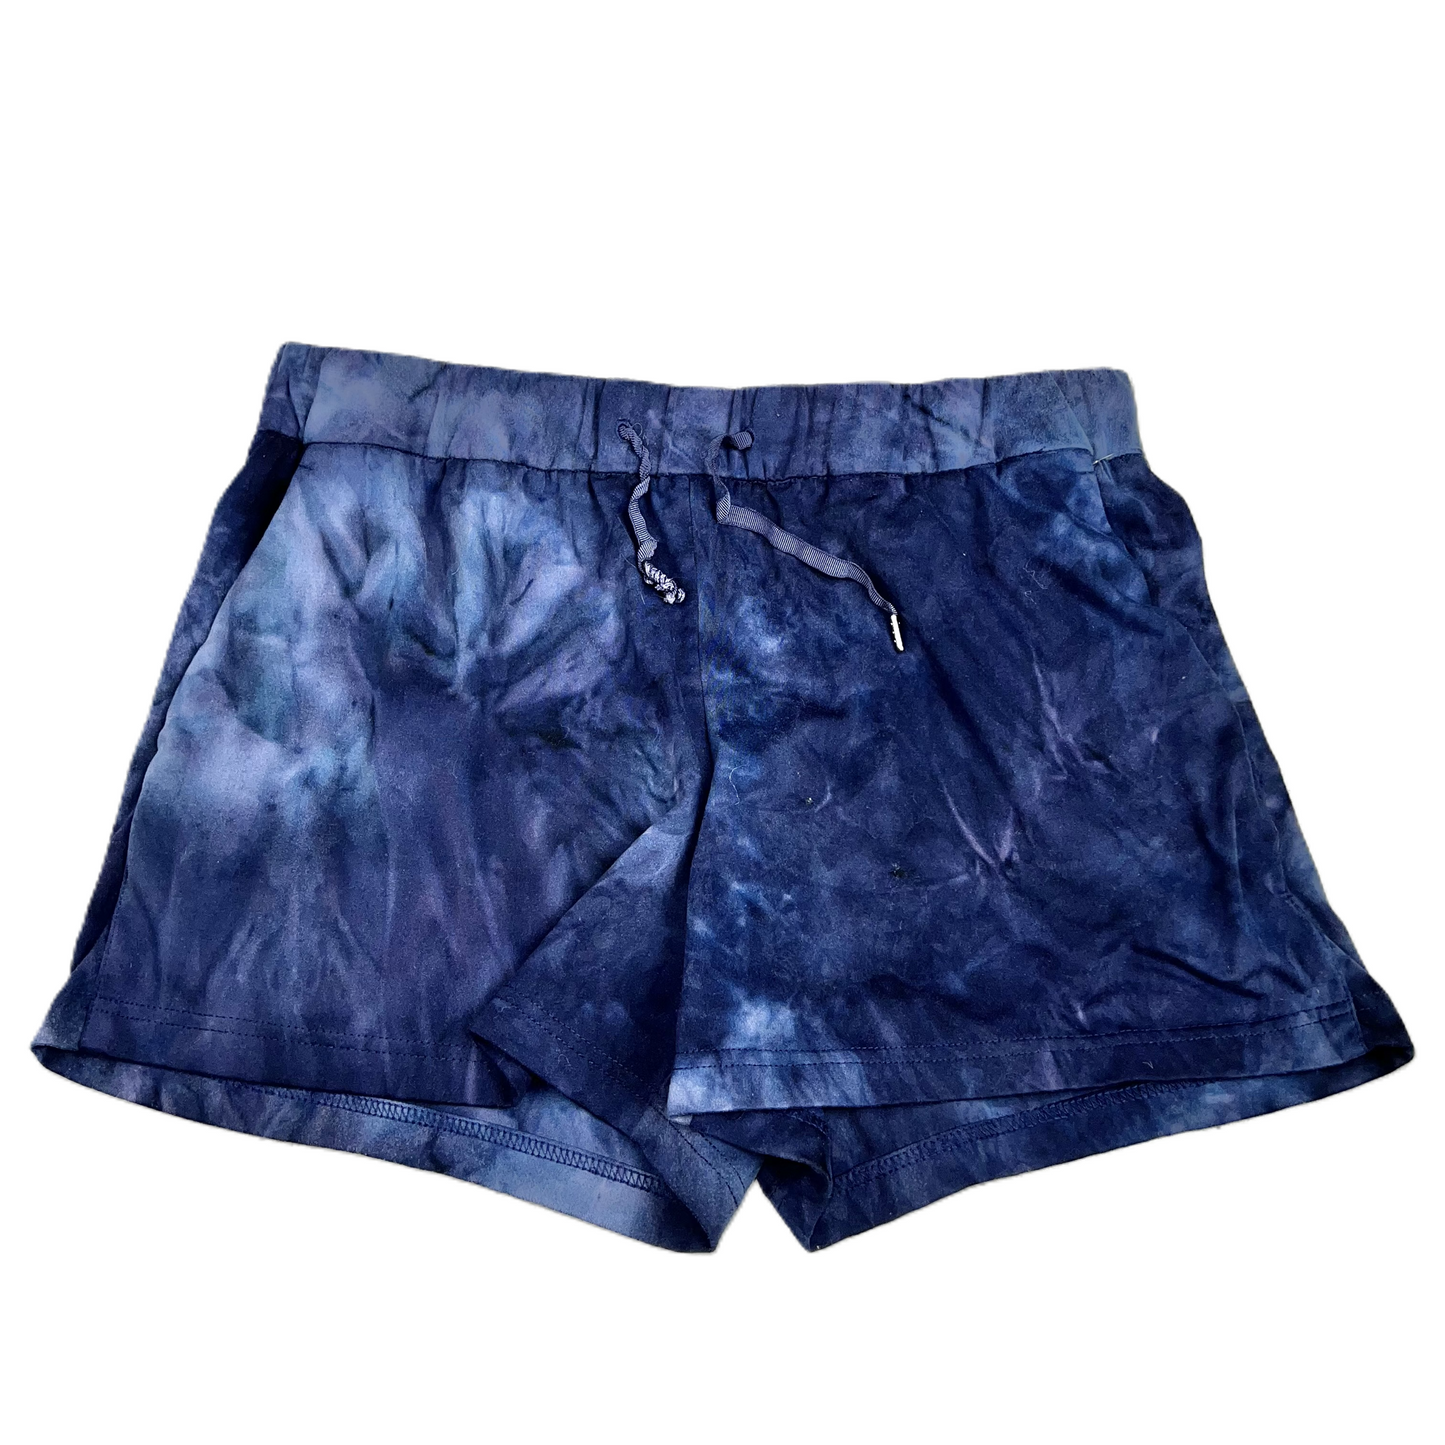 Navy Shorts By Nicole Miller, Size: L